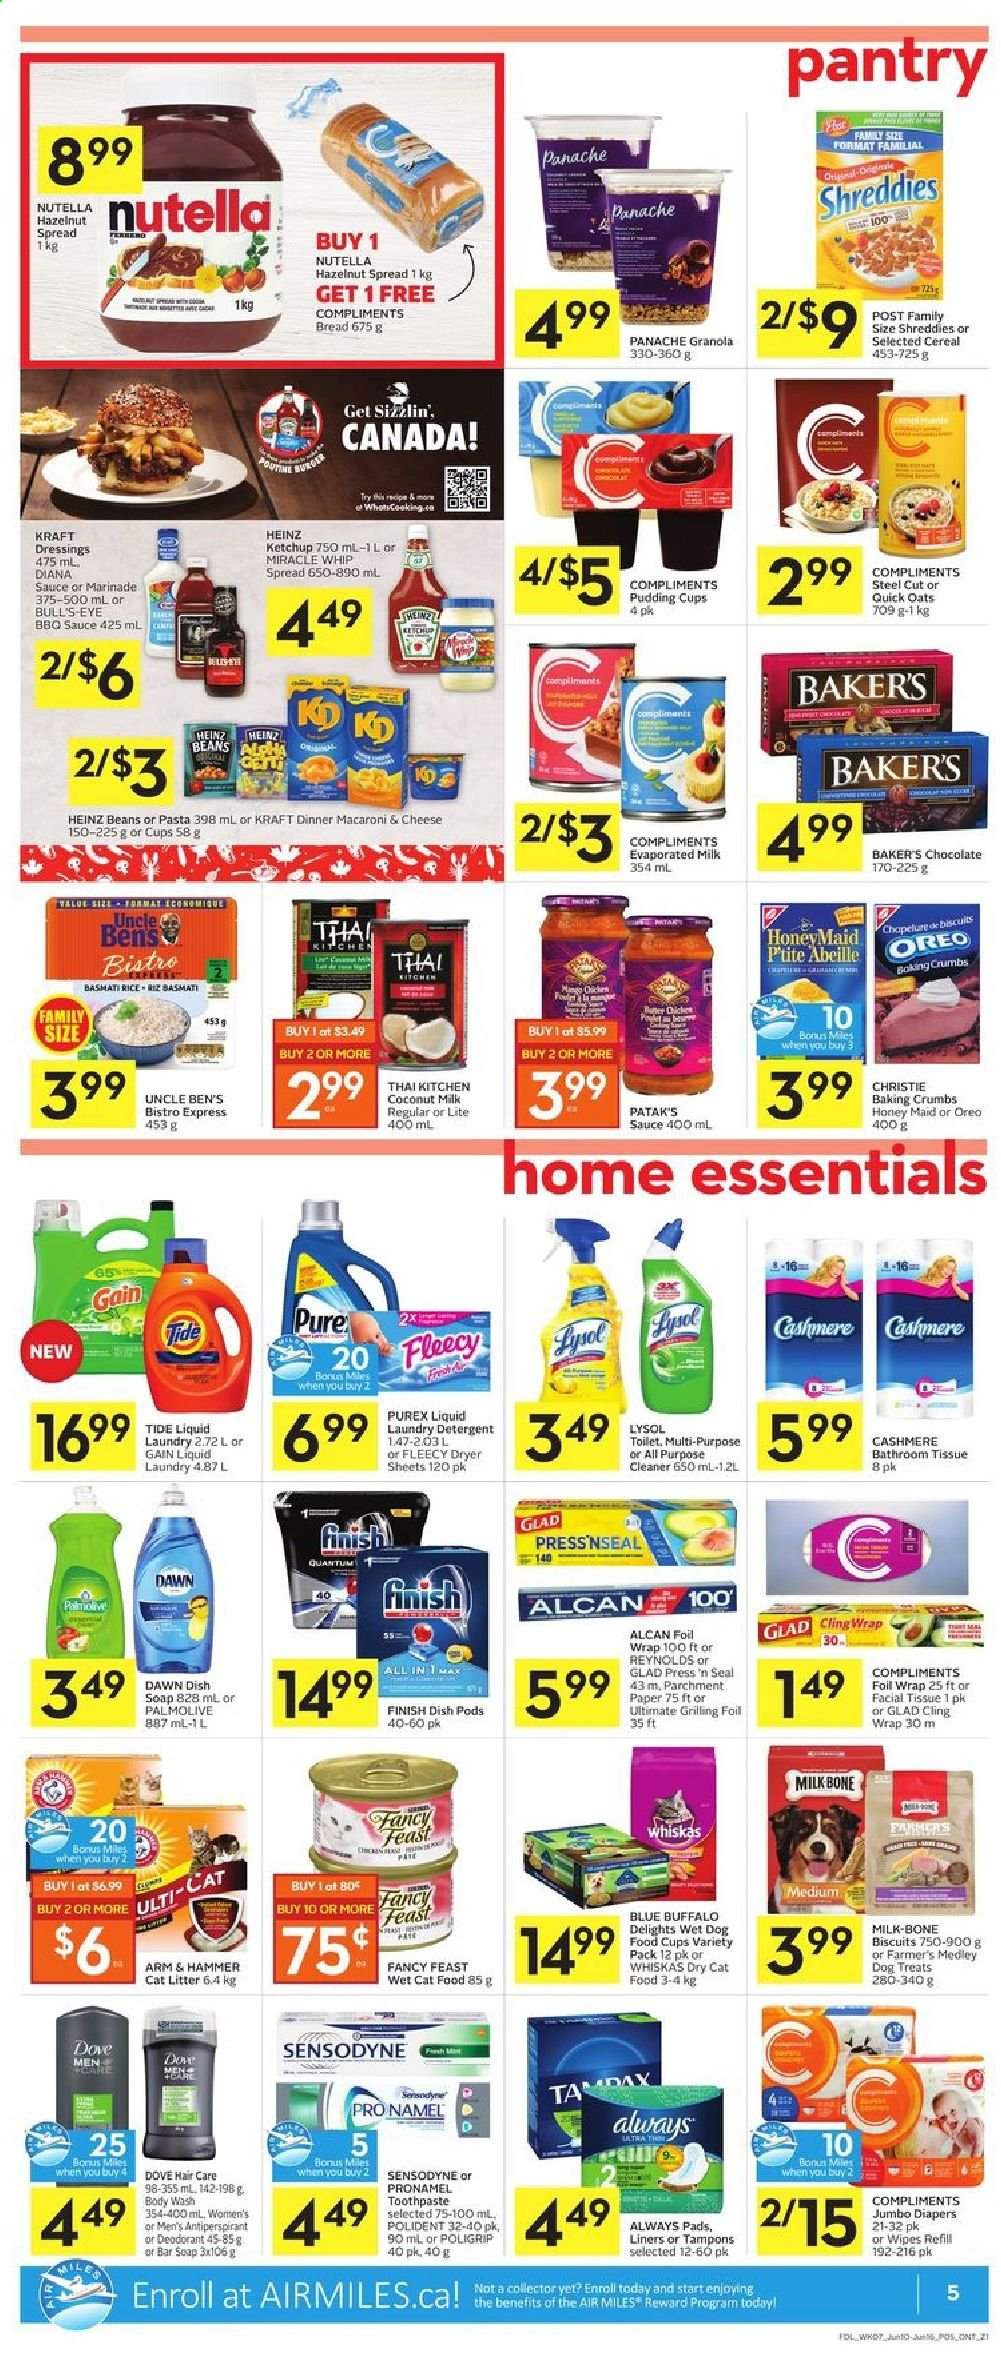 thumbnail - Foodland Flyer - June 10, 2021 - June 16, 2021 - Sales products - bread, beans, macaroni & cheese, Kraft®, pudding, Oreo, evaporated milk, Miracle Whip, chocolate, biscuit, ARM & HAMMER, oats, coconut milk, Heinz, Uncle Ben's, cereals, Quick Oats, Honey Maid, basmati rice, rice, BBQ sauce, marinade, hazelnut spread, granola, Nutella, Sensodyne. Page 5.